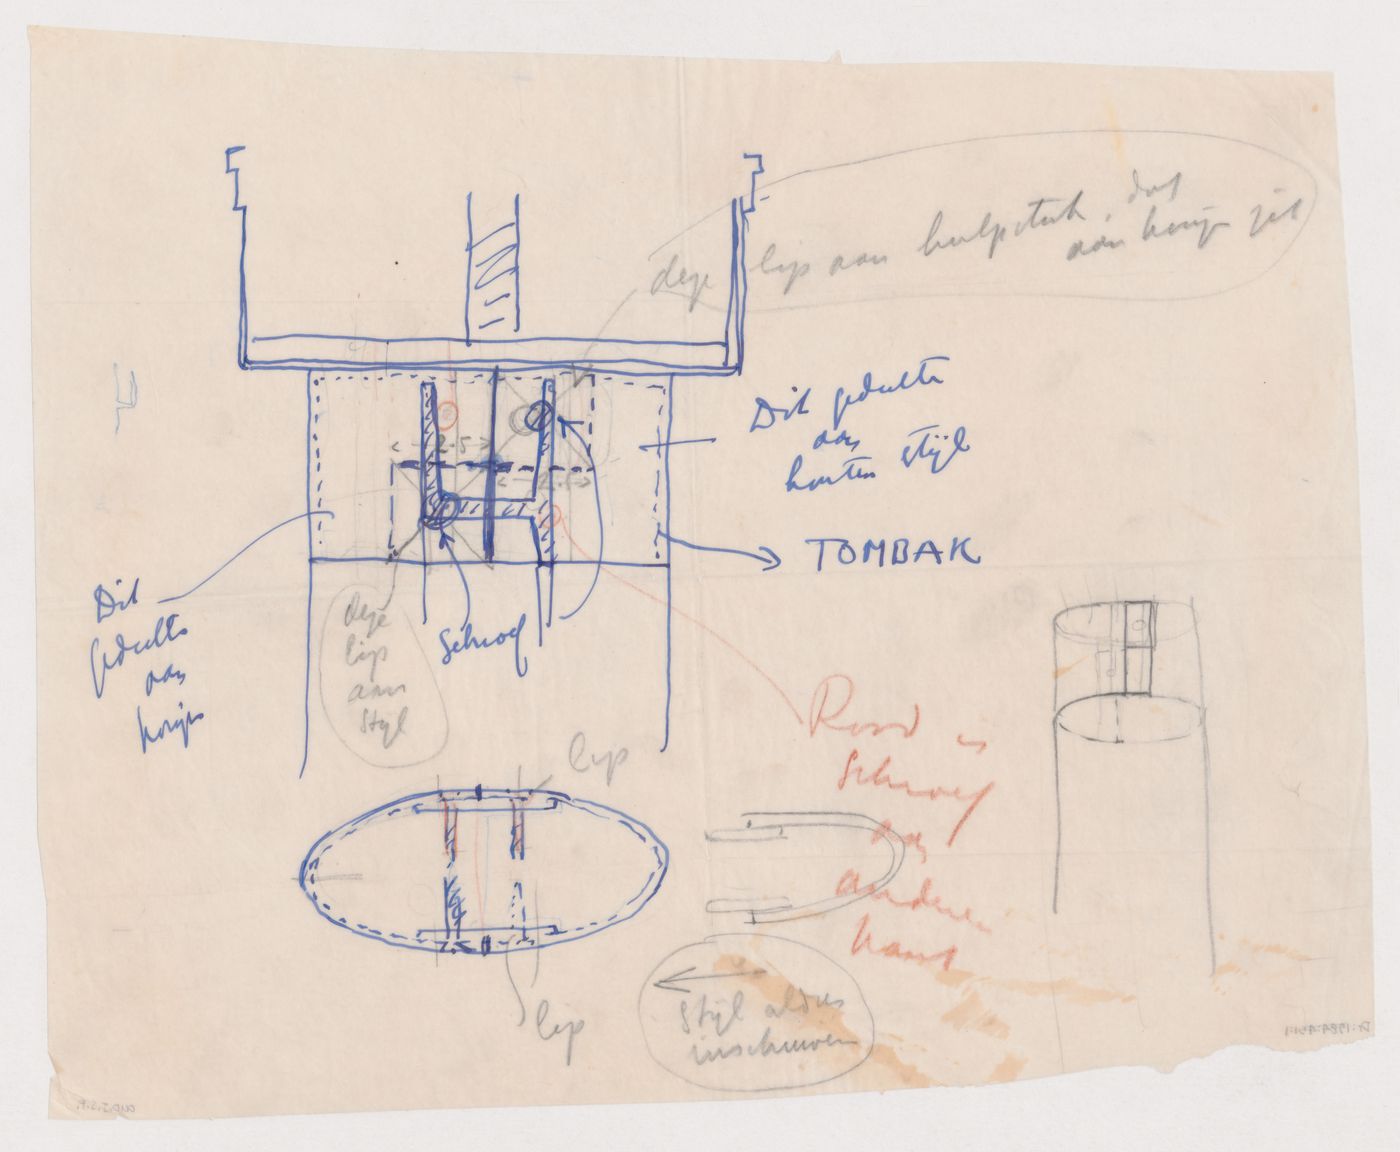 Sketch sections for joinery details, possibly for the Shell Building, The Hague, Netherlands